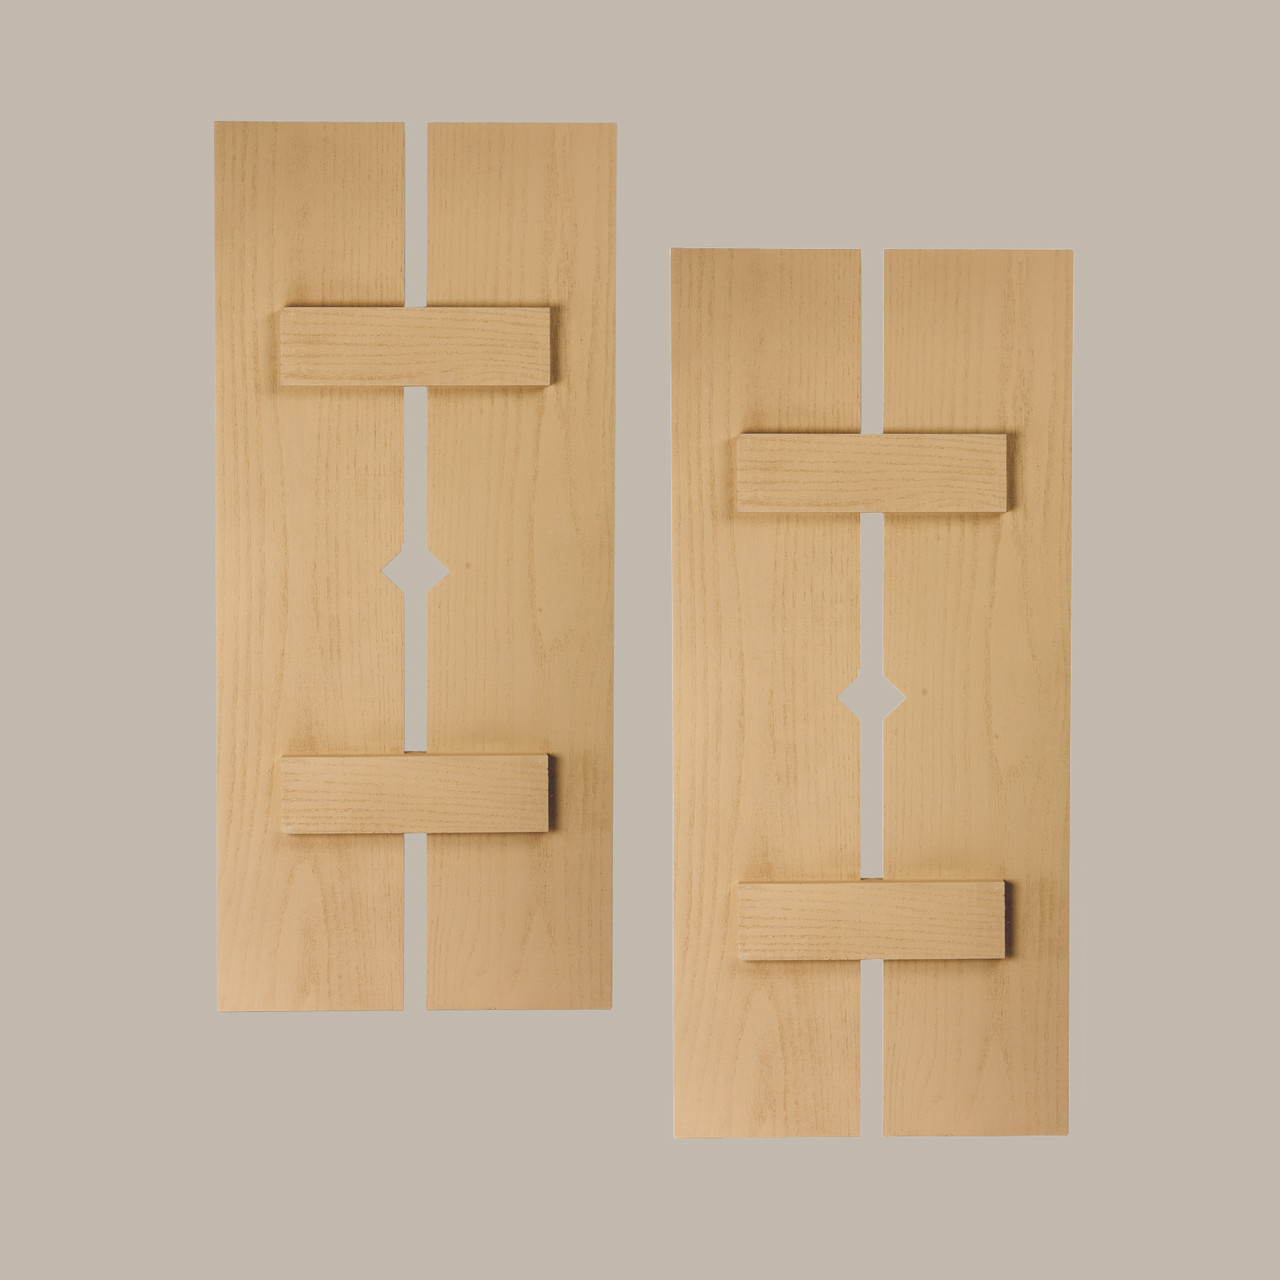 12 inch by 58 inch Plank Shutter with 2-Plank, Diamond